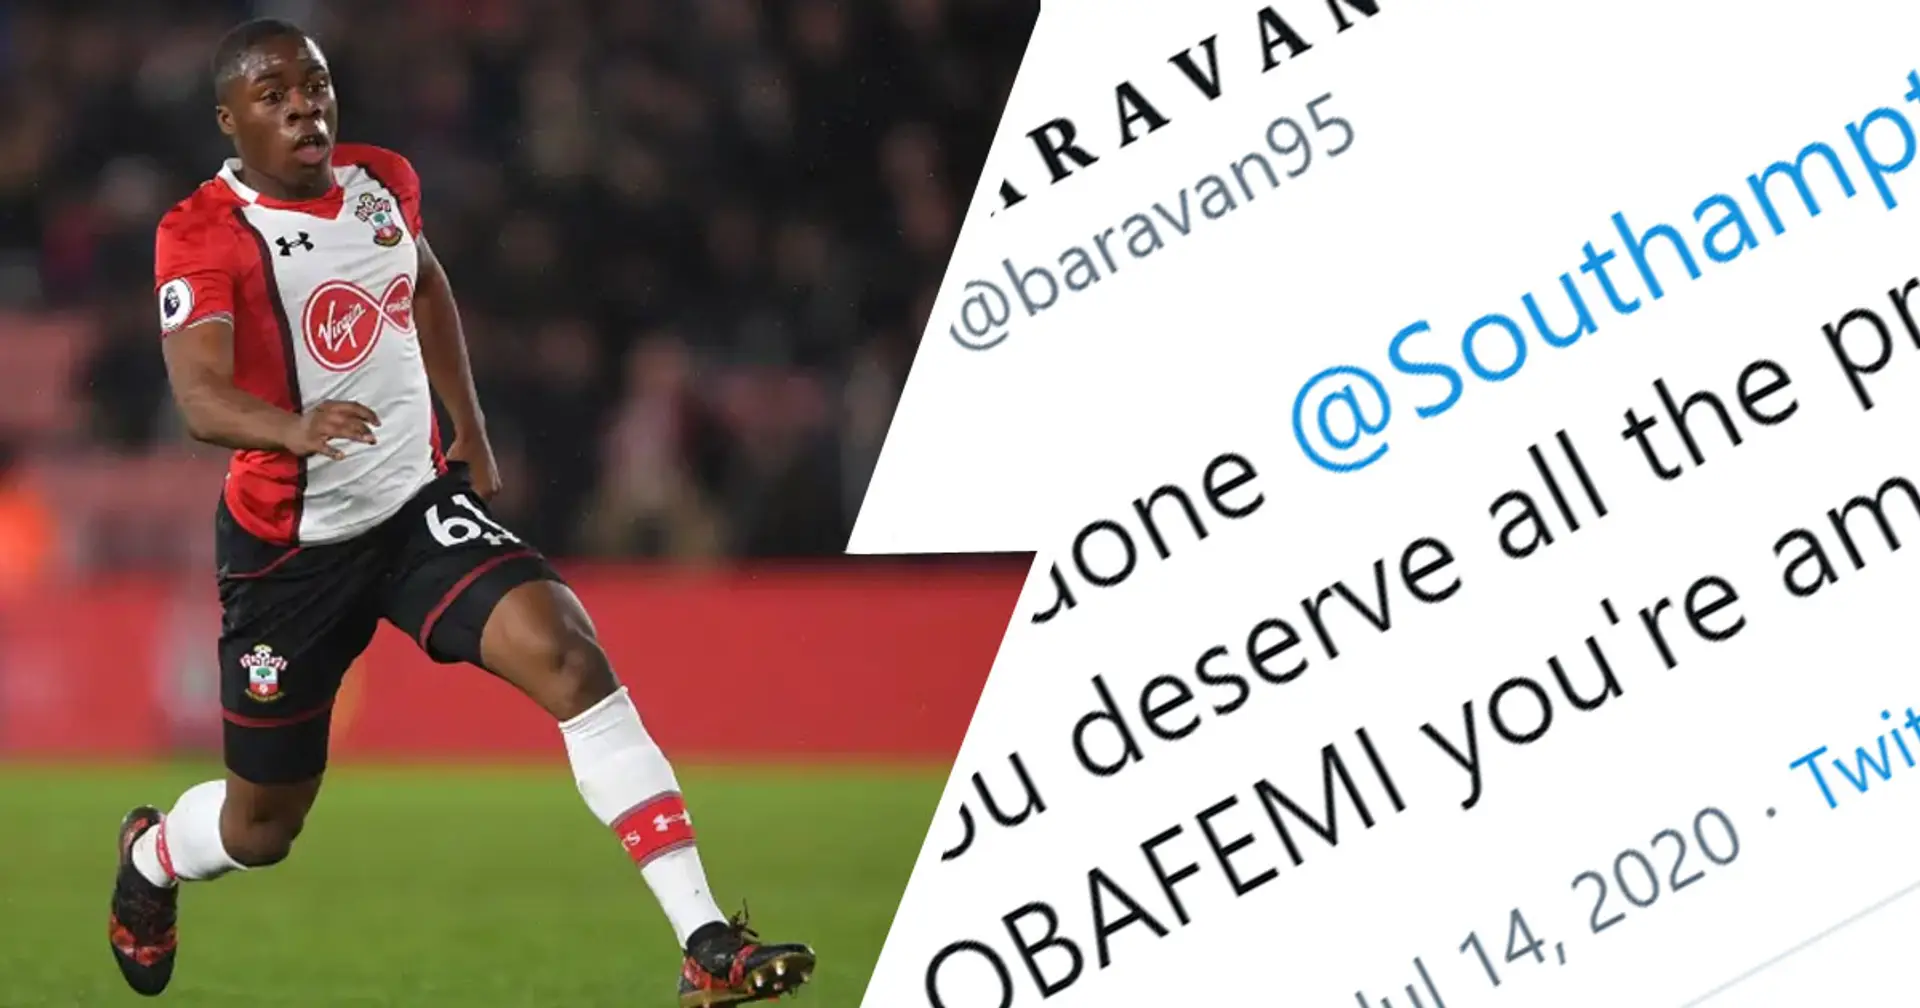 'Thank you', 'You're amazing man': Chelsea fans celebrate Michael Obafemi's injury-time equaliser as Man United stumble in top-4 race